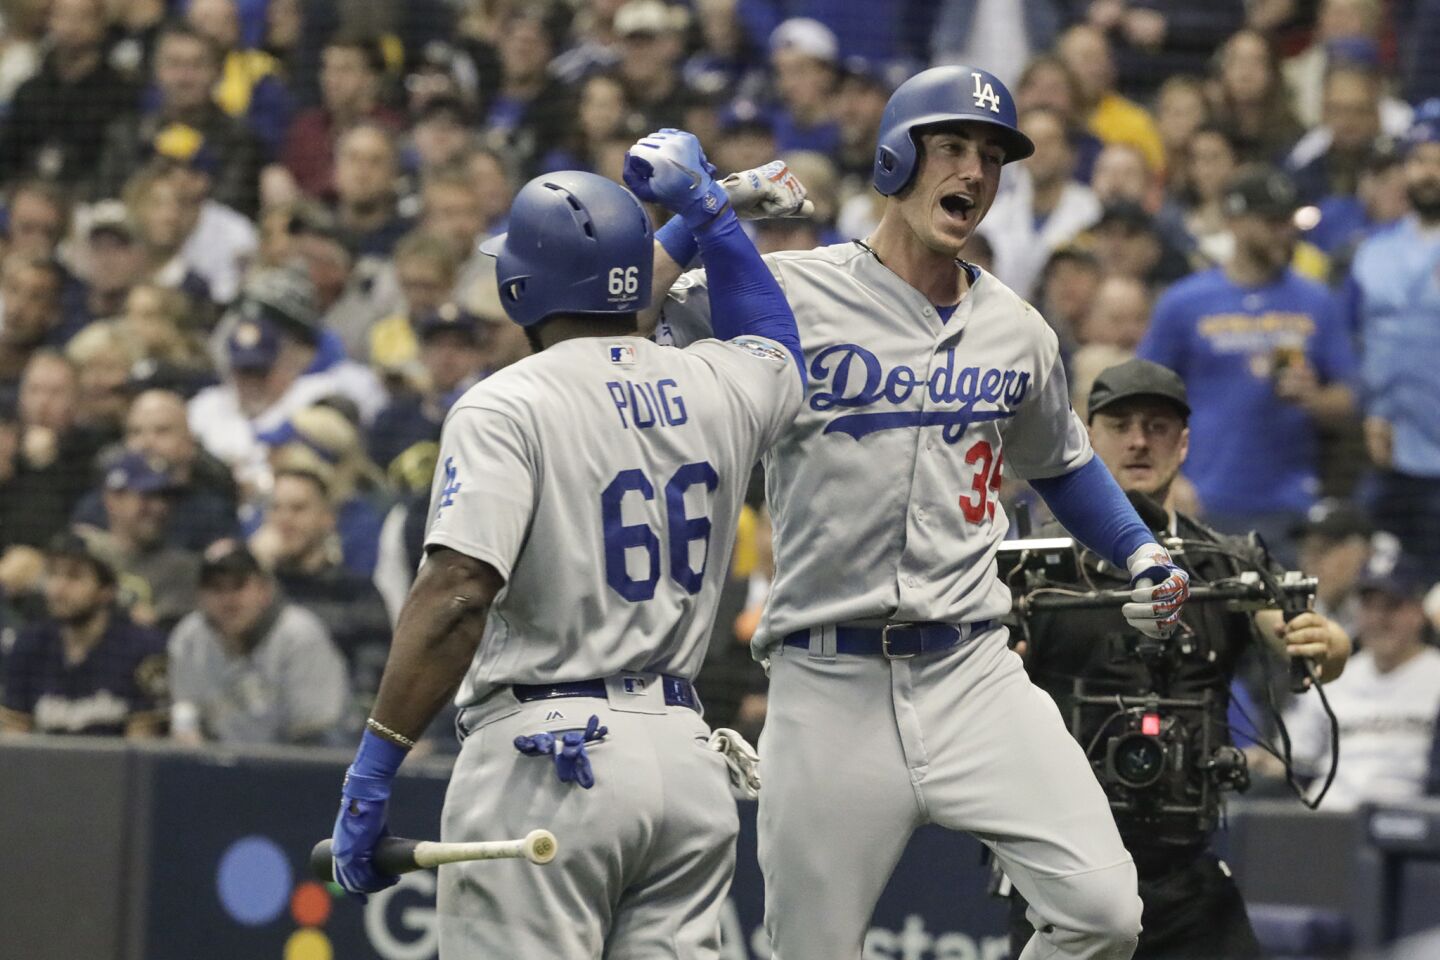 Cody Bellinger celebrates with Yasiel Puig after hitting a second inning, two run homer.